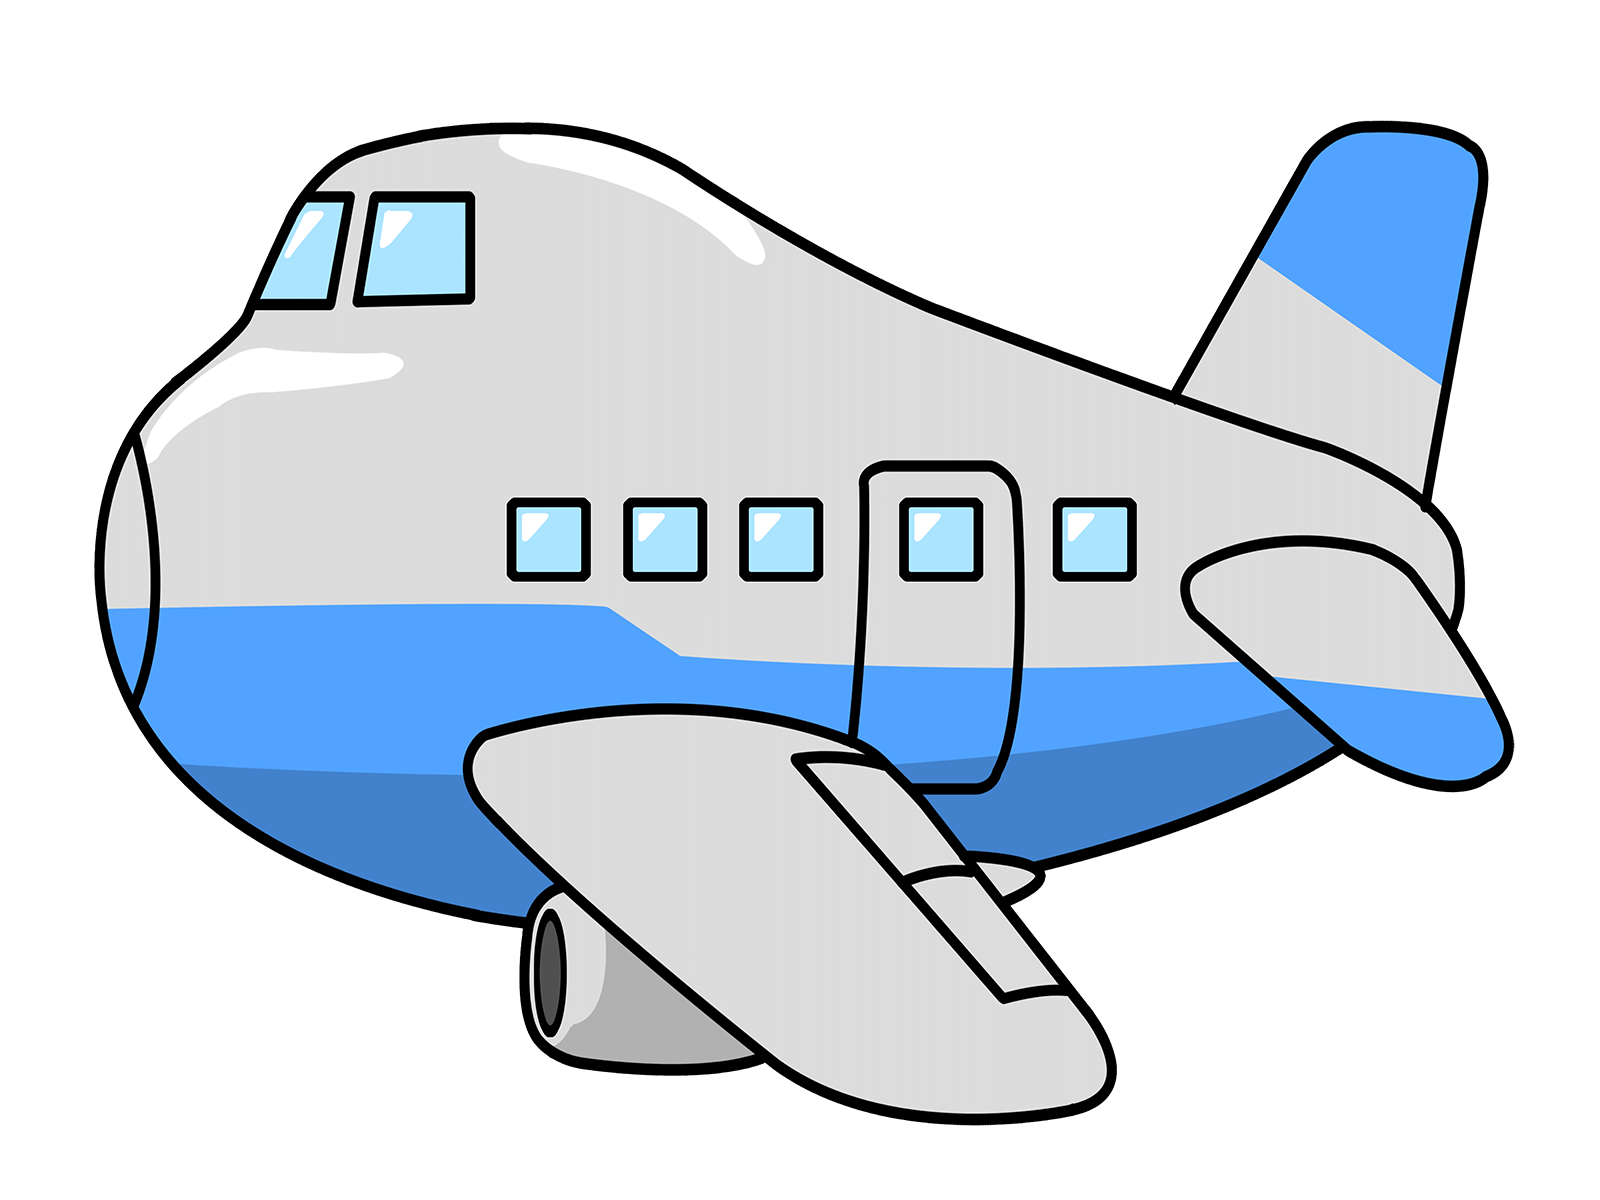 Free Animated Plane Cliparts, Download Free Clip Art, Free.